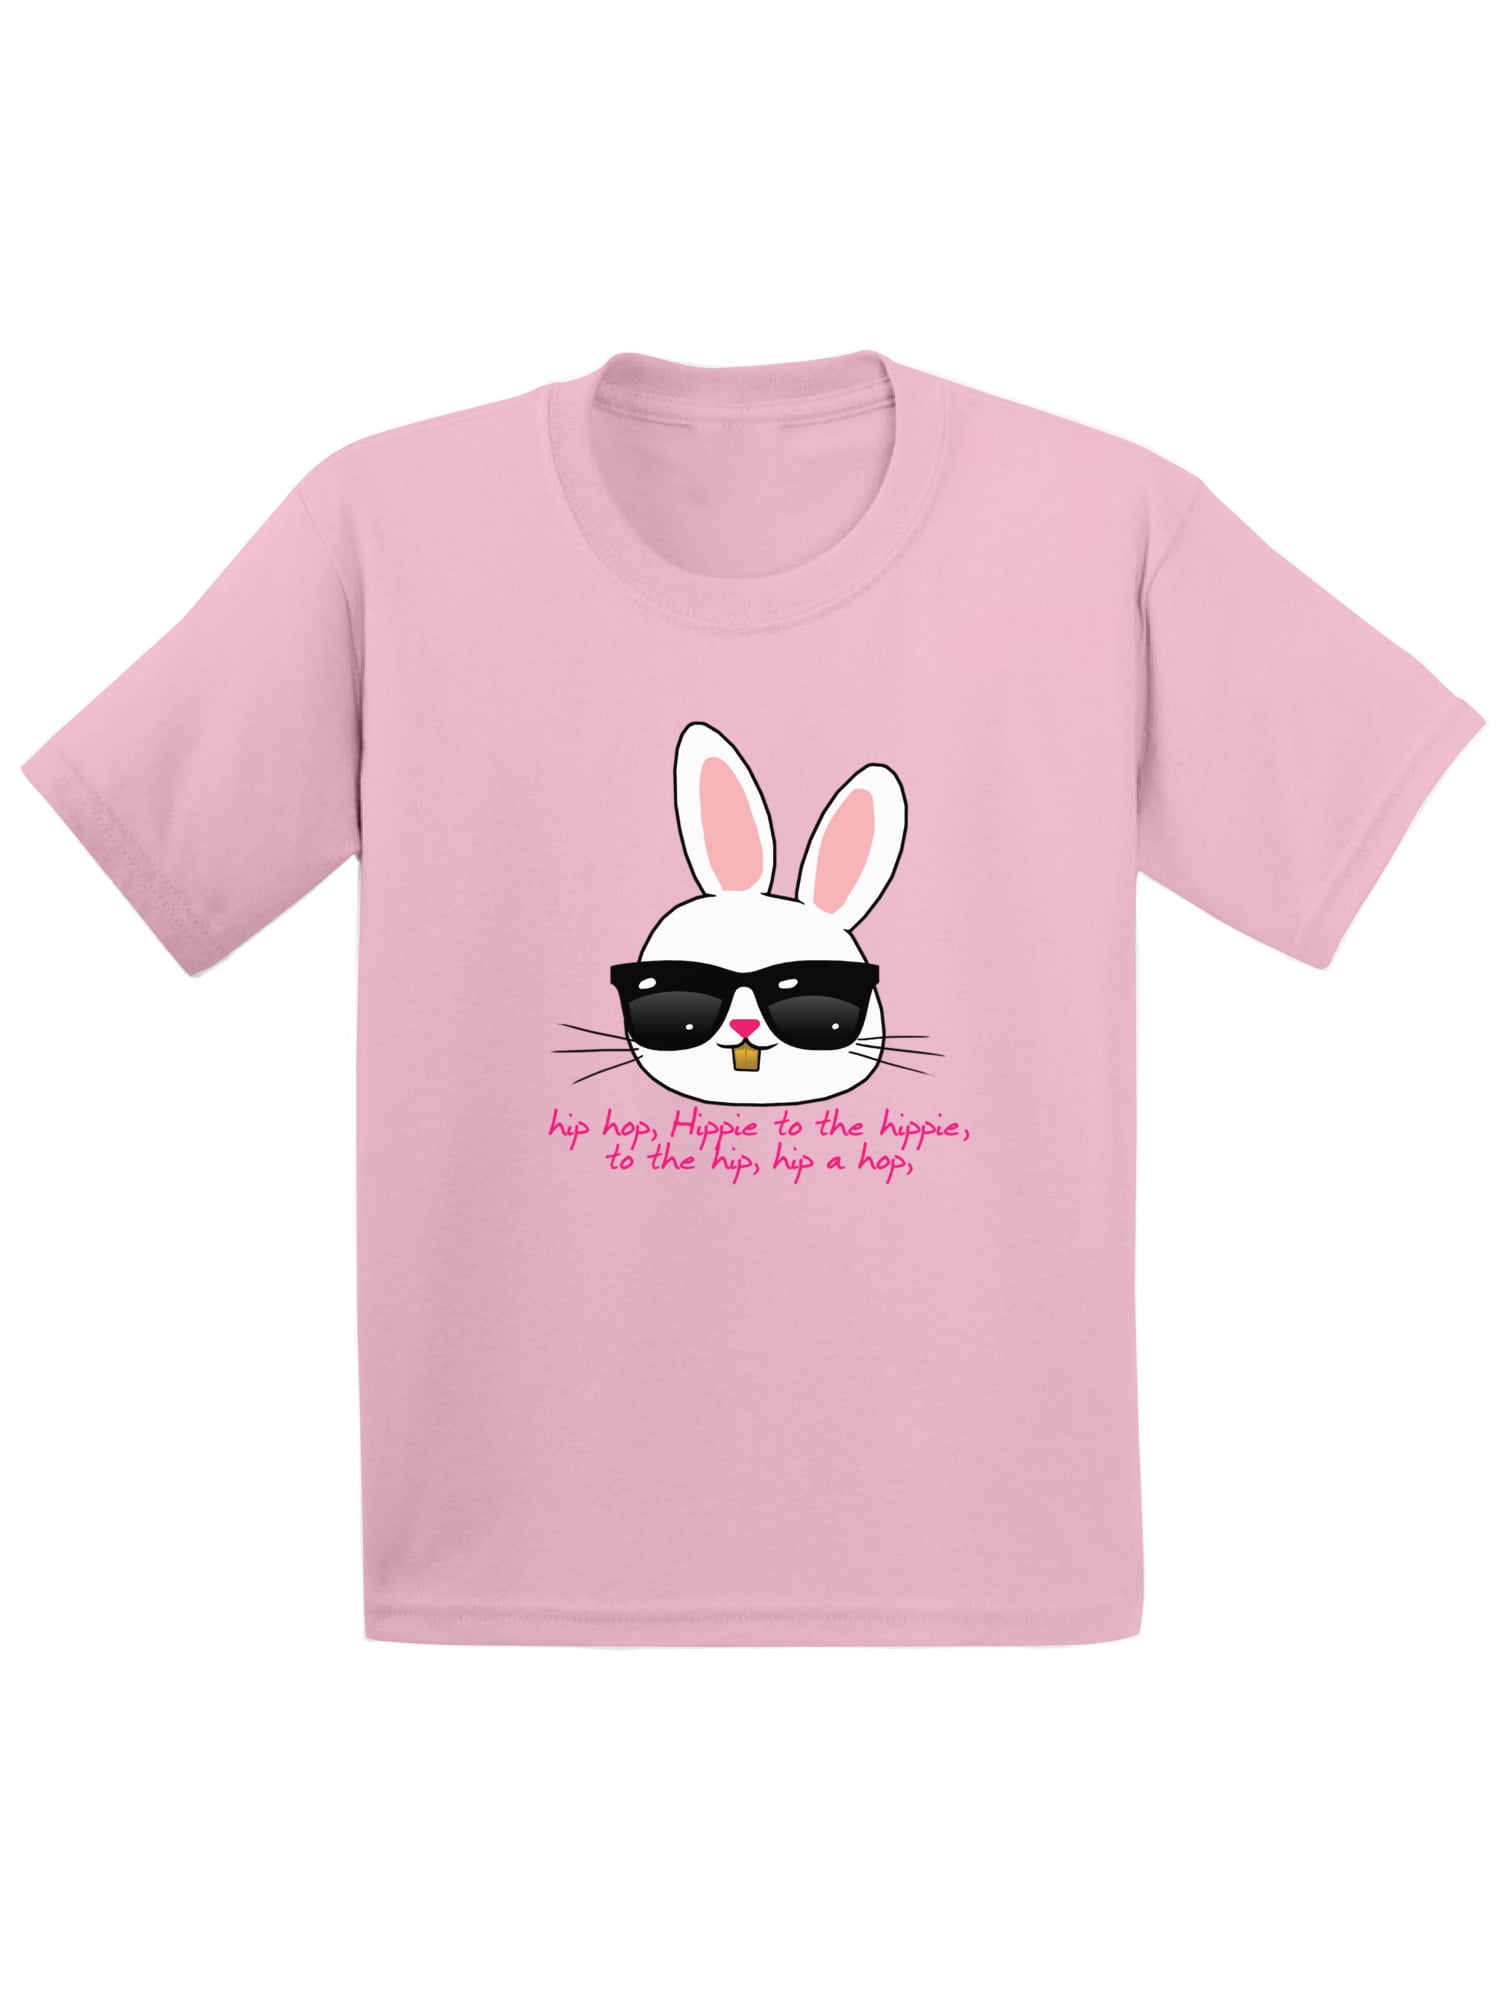 Easter Shirt For Woman Easter Day Shirt You Are My Chocolate Bunny Easter Bunny Shirt Happy Easter Shirt Cute Easter Shirt